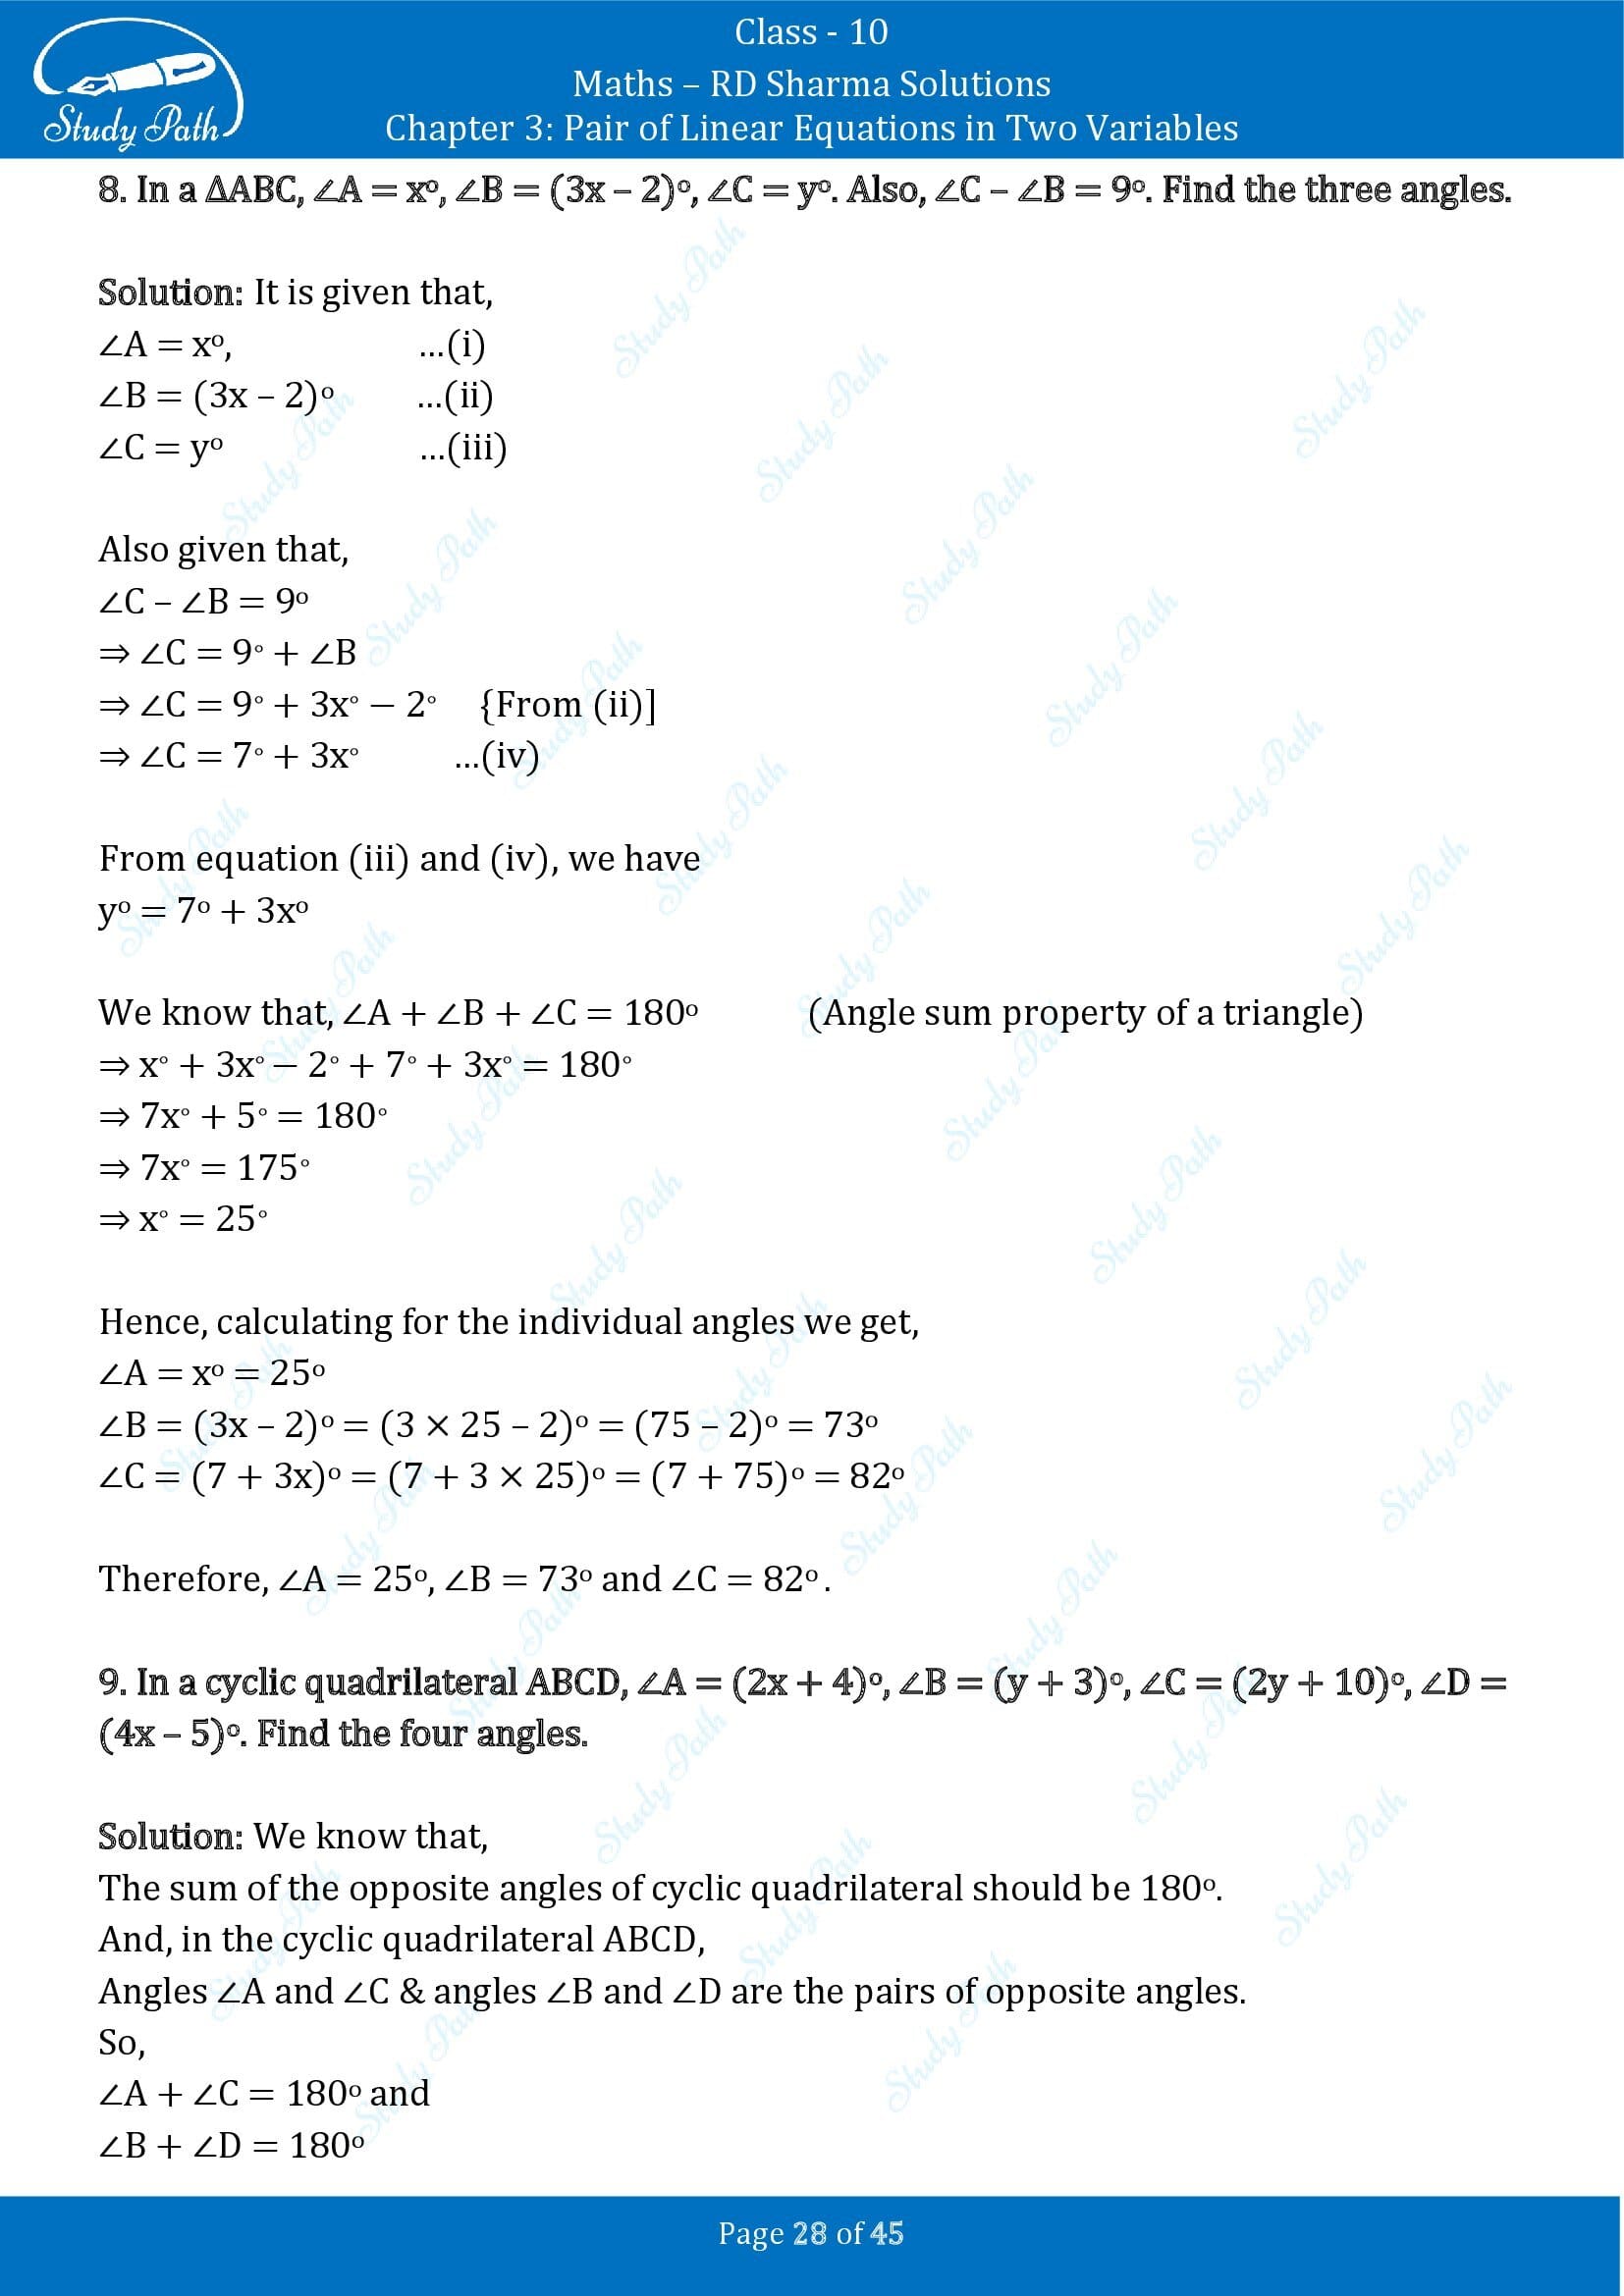 RD Sharma Solutions Class 10 Chapter 3 Pair of Linear Equations in Two Variables Exercise 3.11 00028